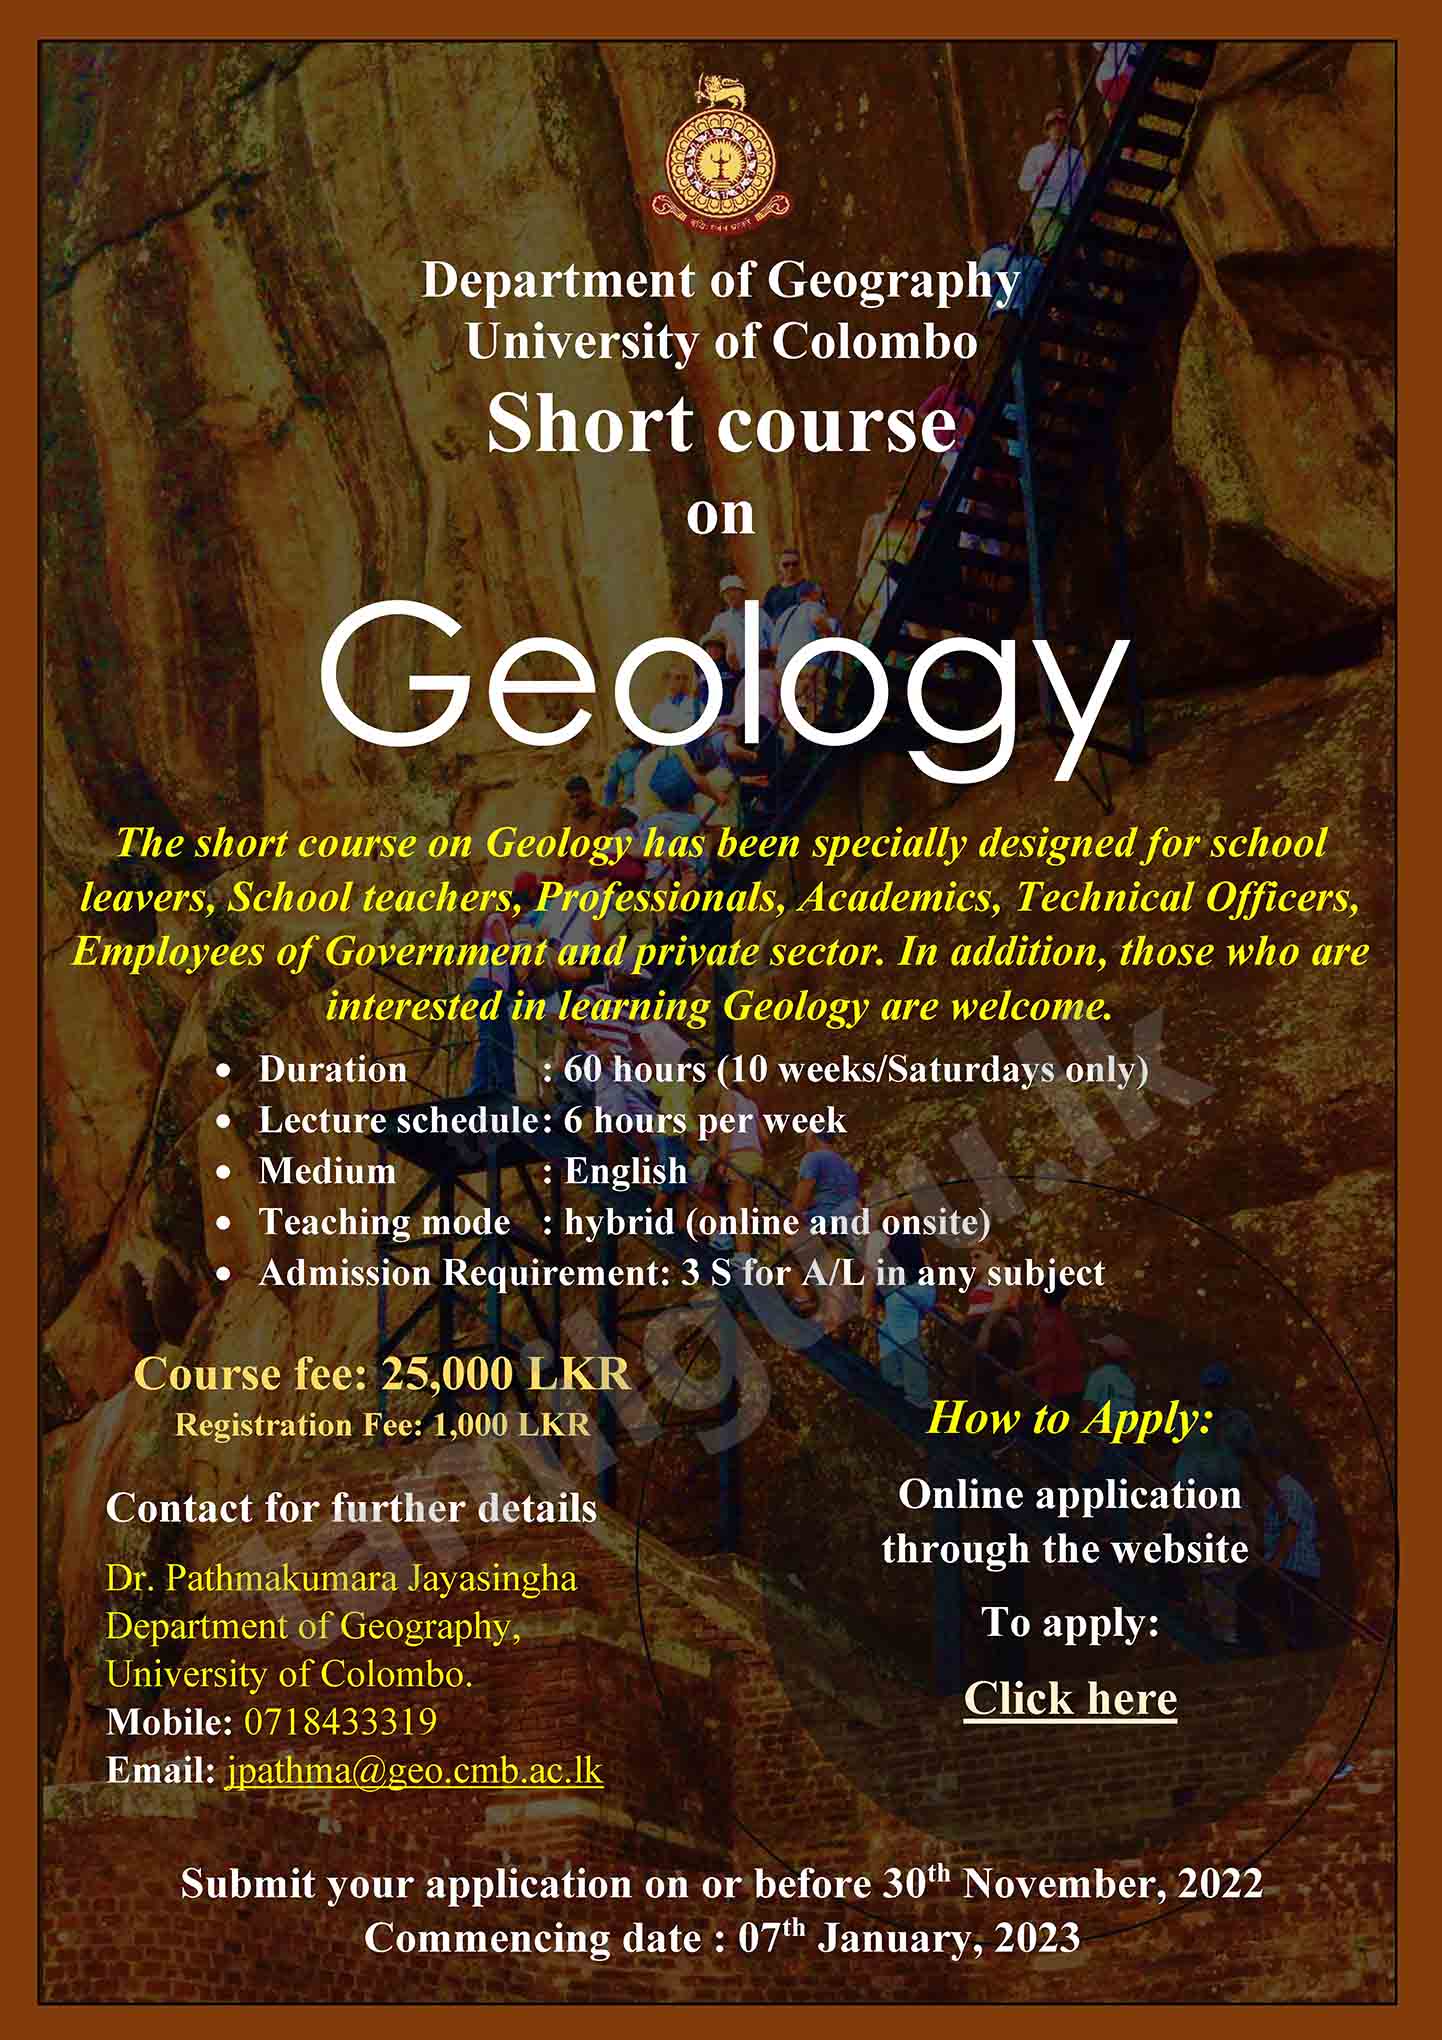 Short Course on Geology Application 2022/2023 - University of Colombo